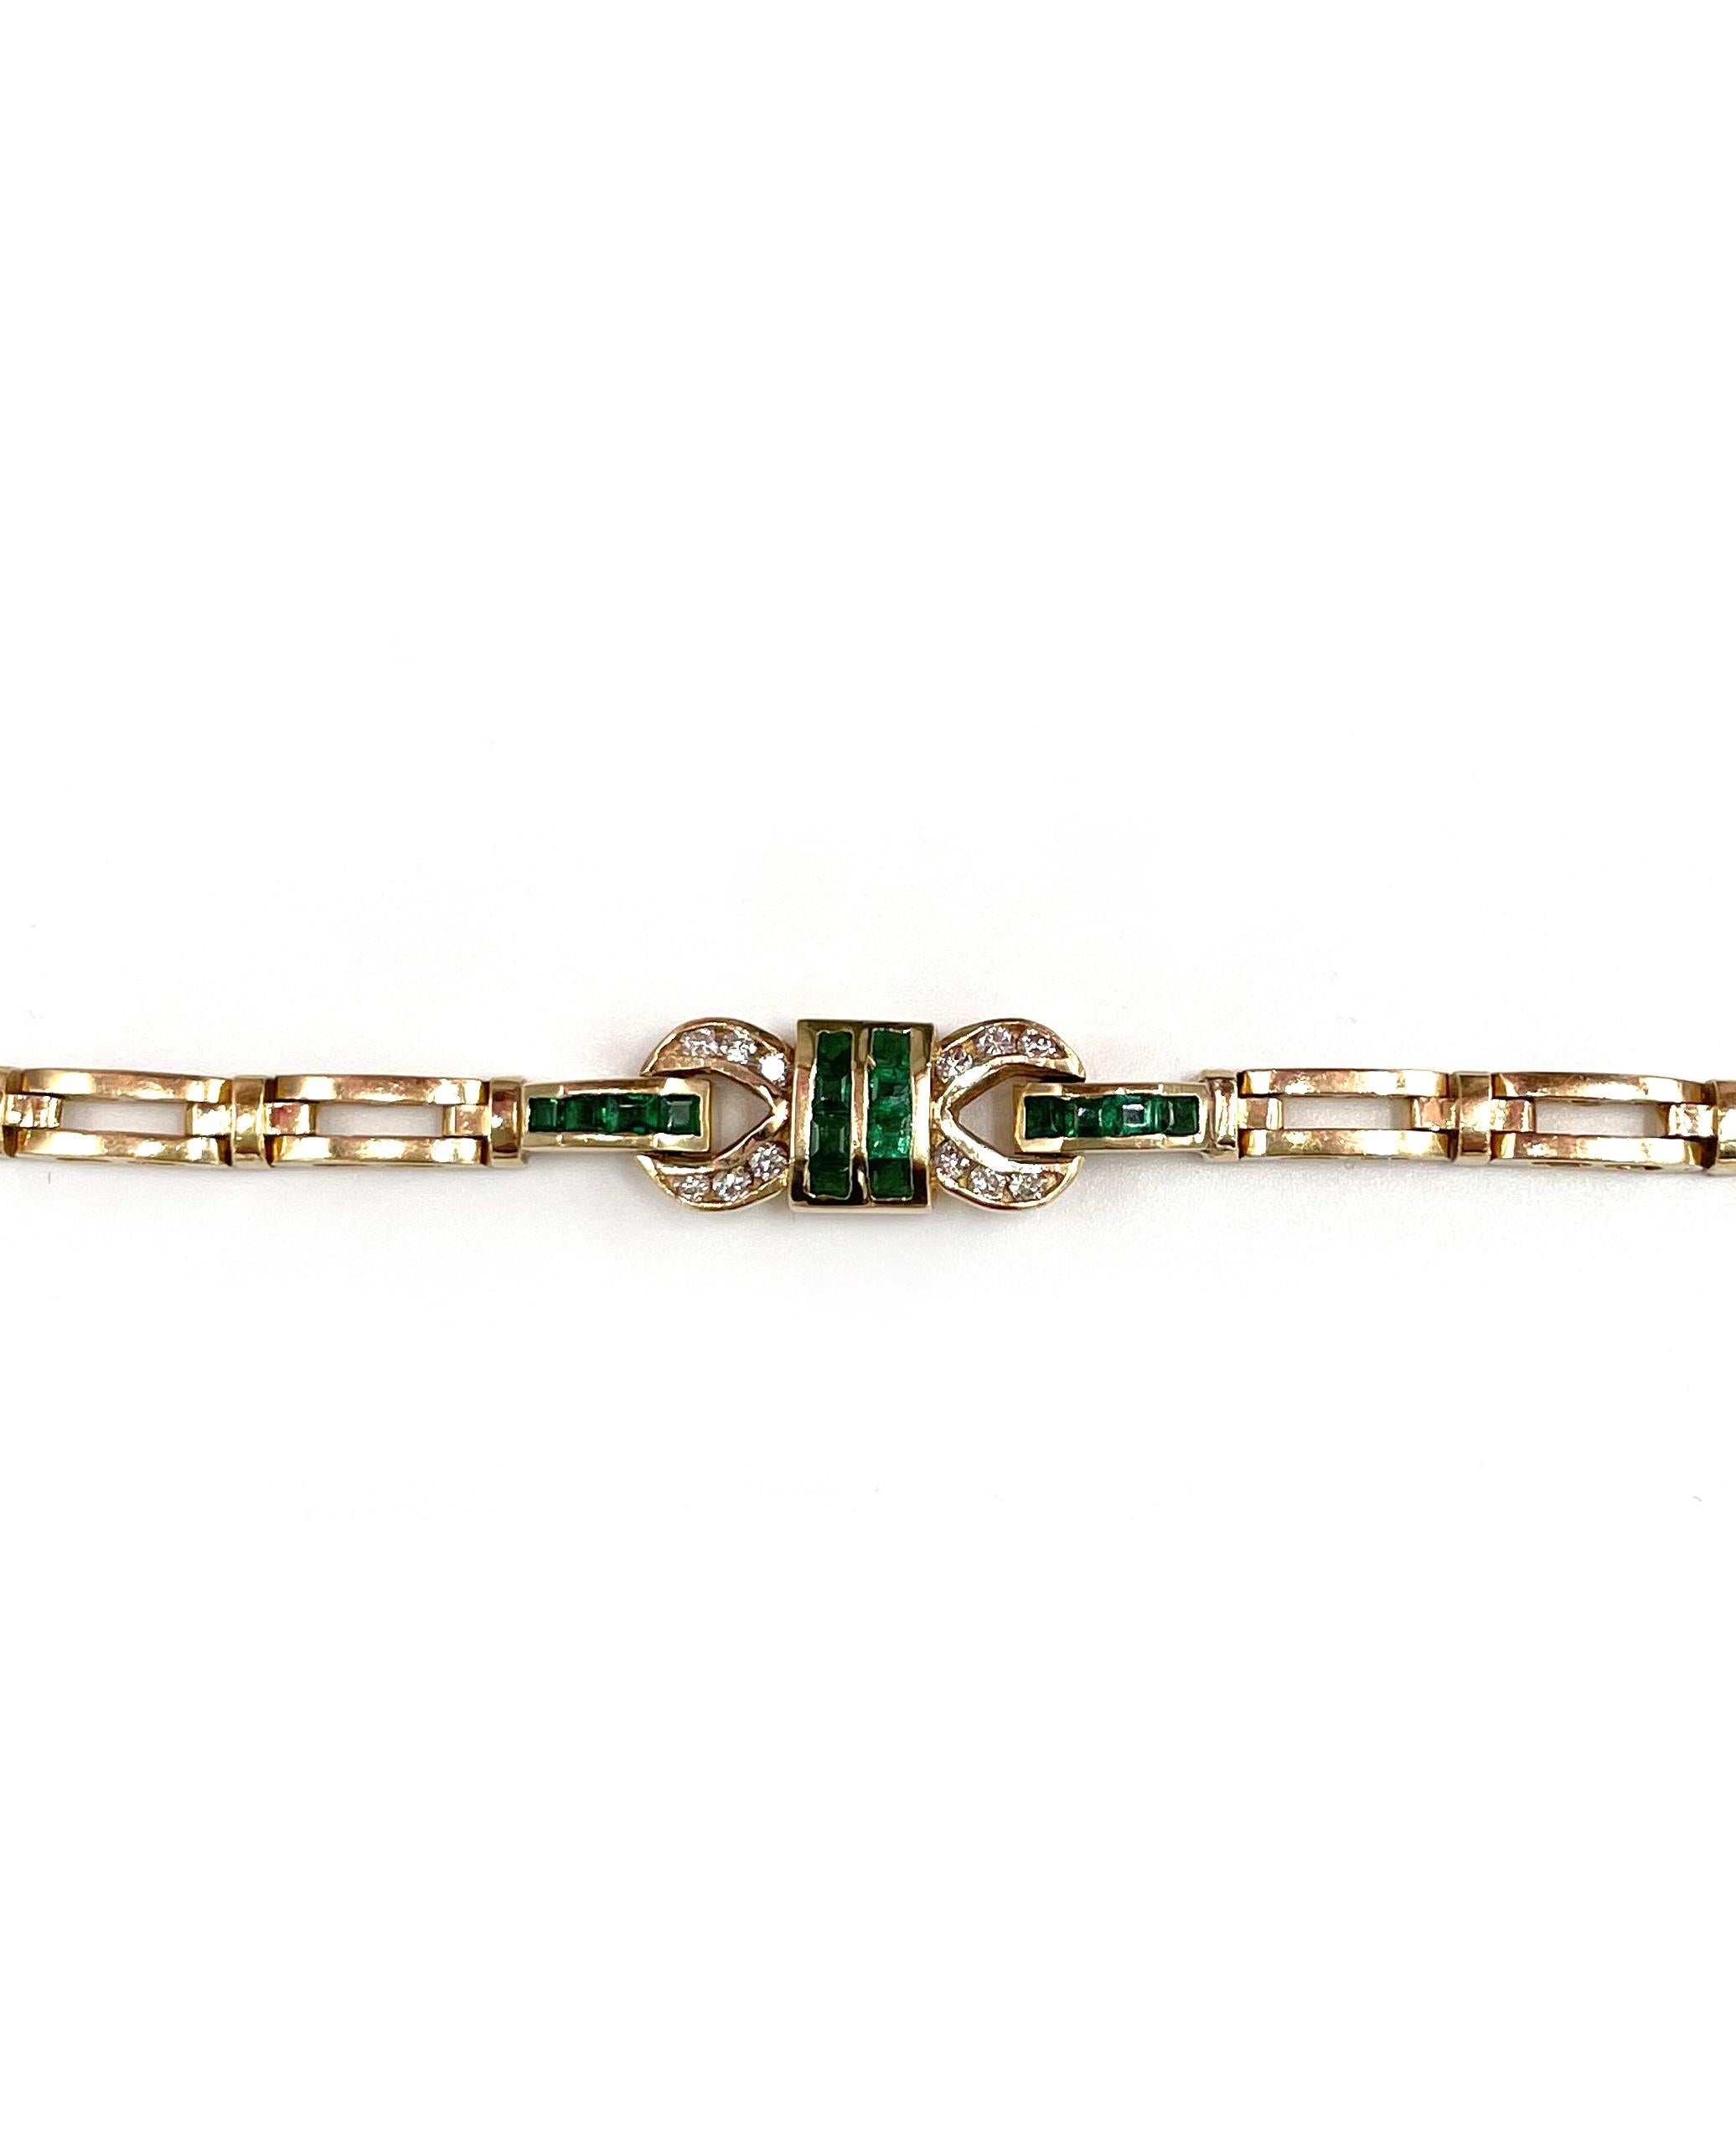 Vintage 14K yellow gold bracelet with 12 round diamonds totaling 0.25 carats and with 16 square cut emeralds totaling 0.65 carats. 

* Approximately 7 inches in length 
* Circa 1985
* Diamonds are G color, VS clarity